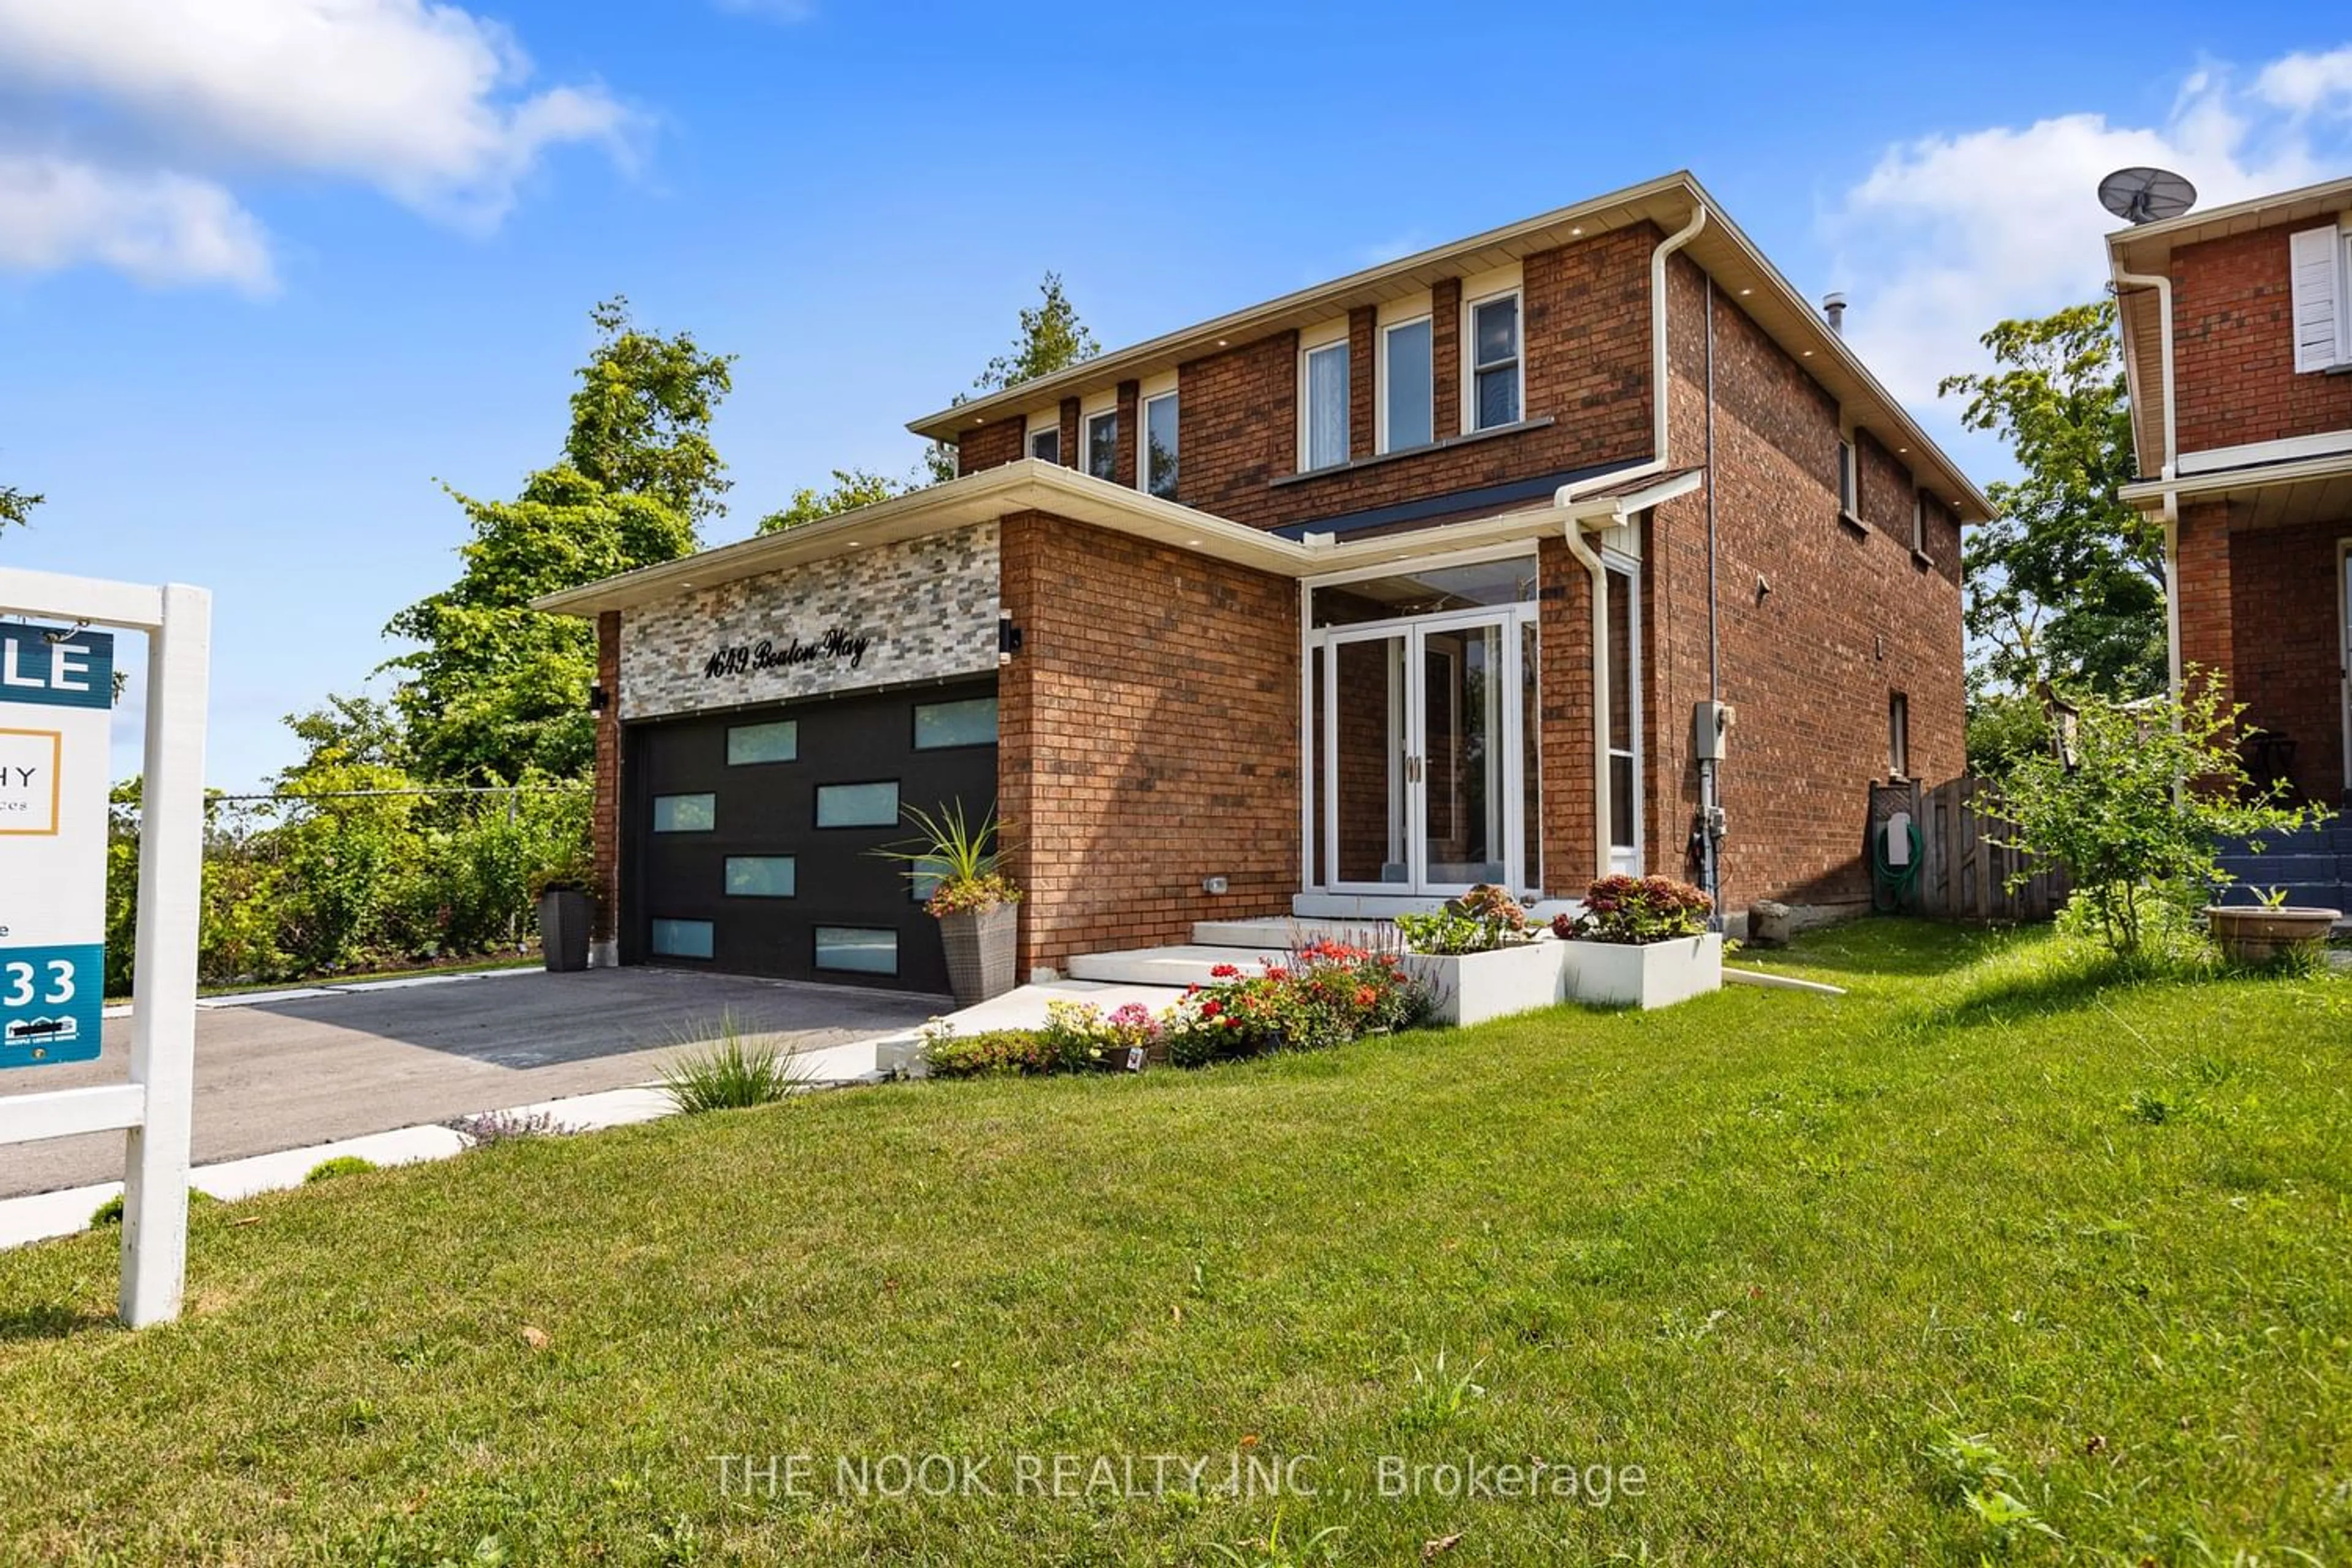 Home with brick exterior material for 1649 Beaton Way, Pickering Ontario L1X 1X7